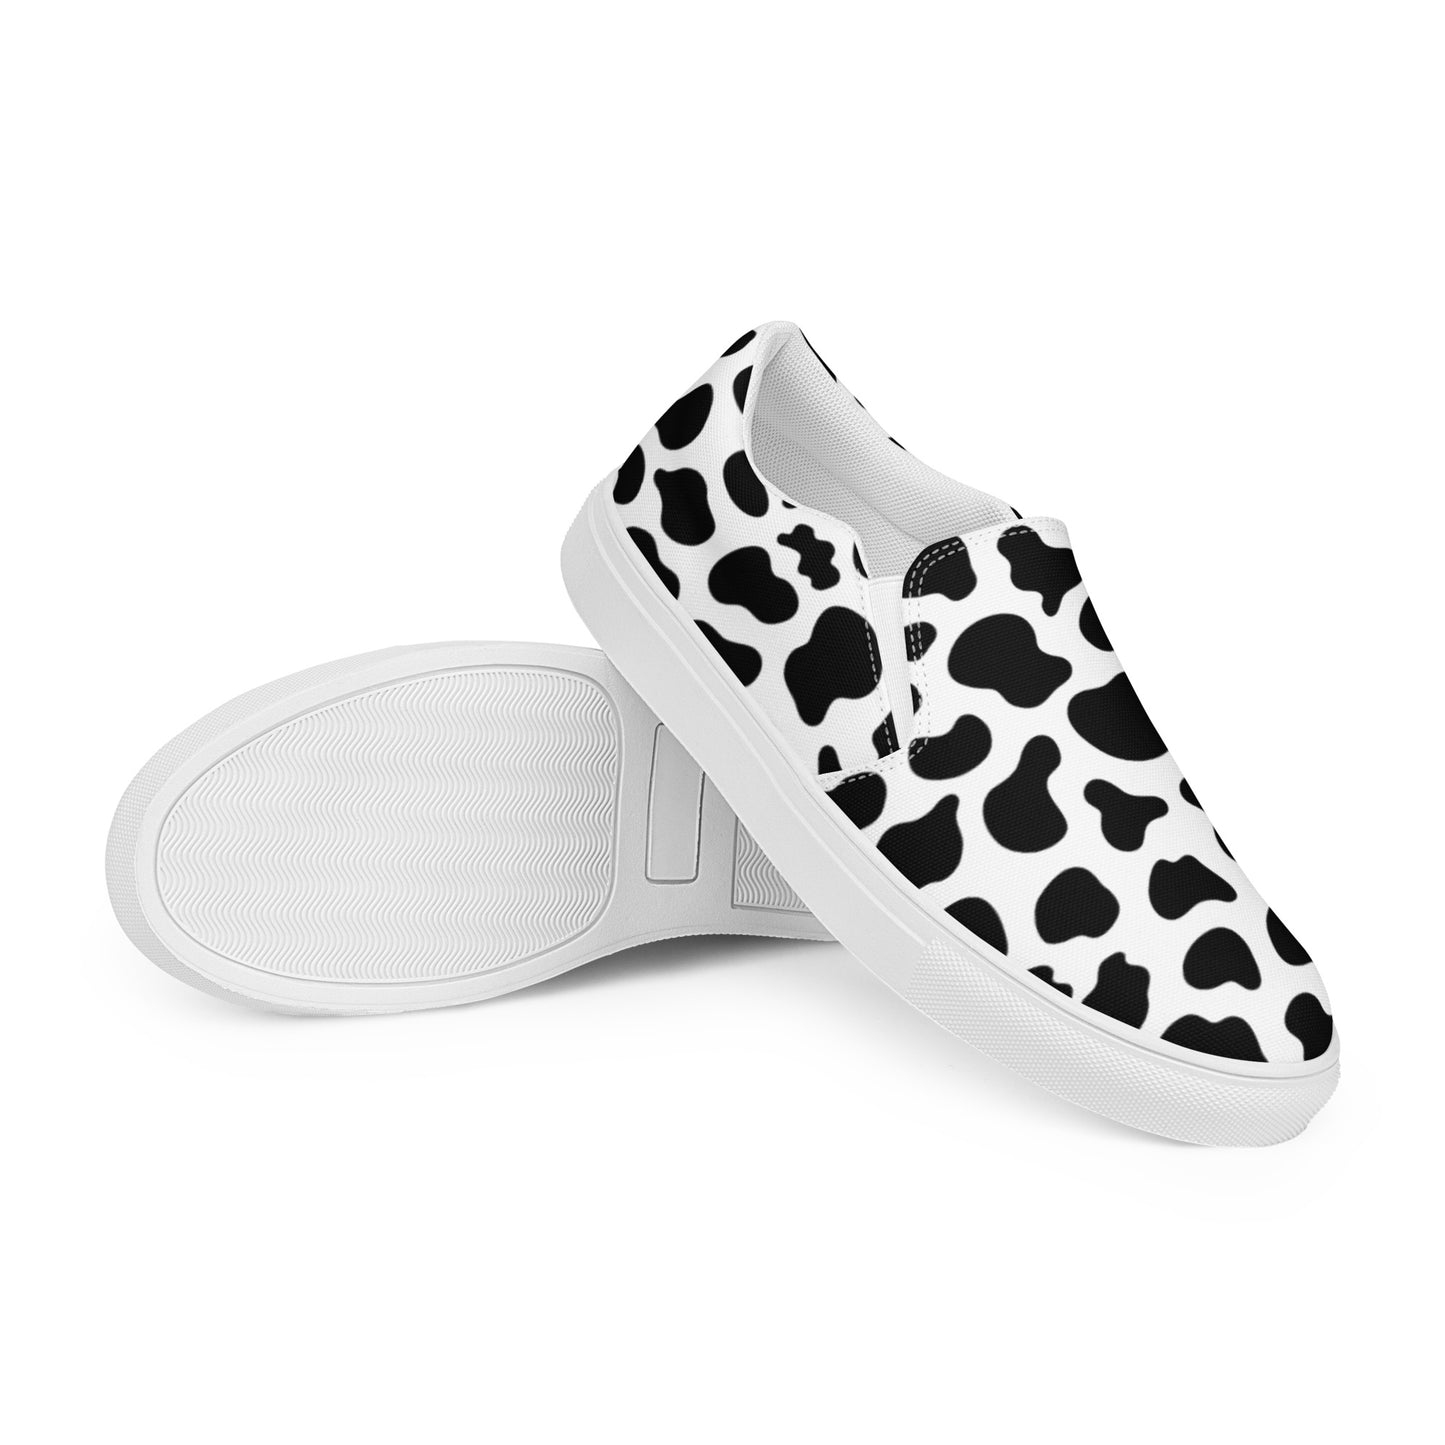 Western Cow Skin Print Women’s slip-on canvas shoes